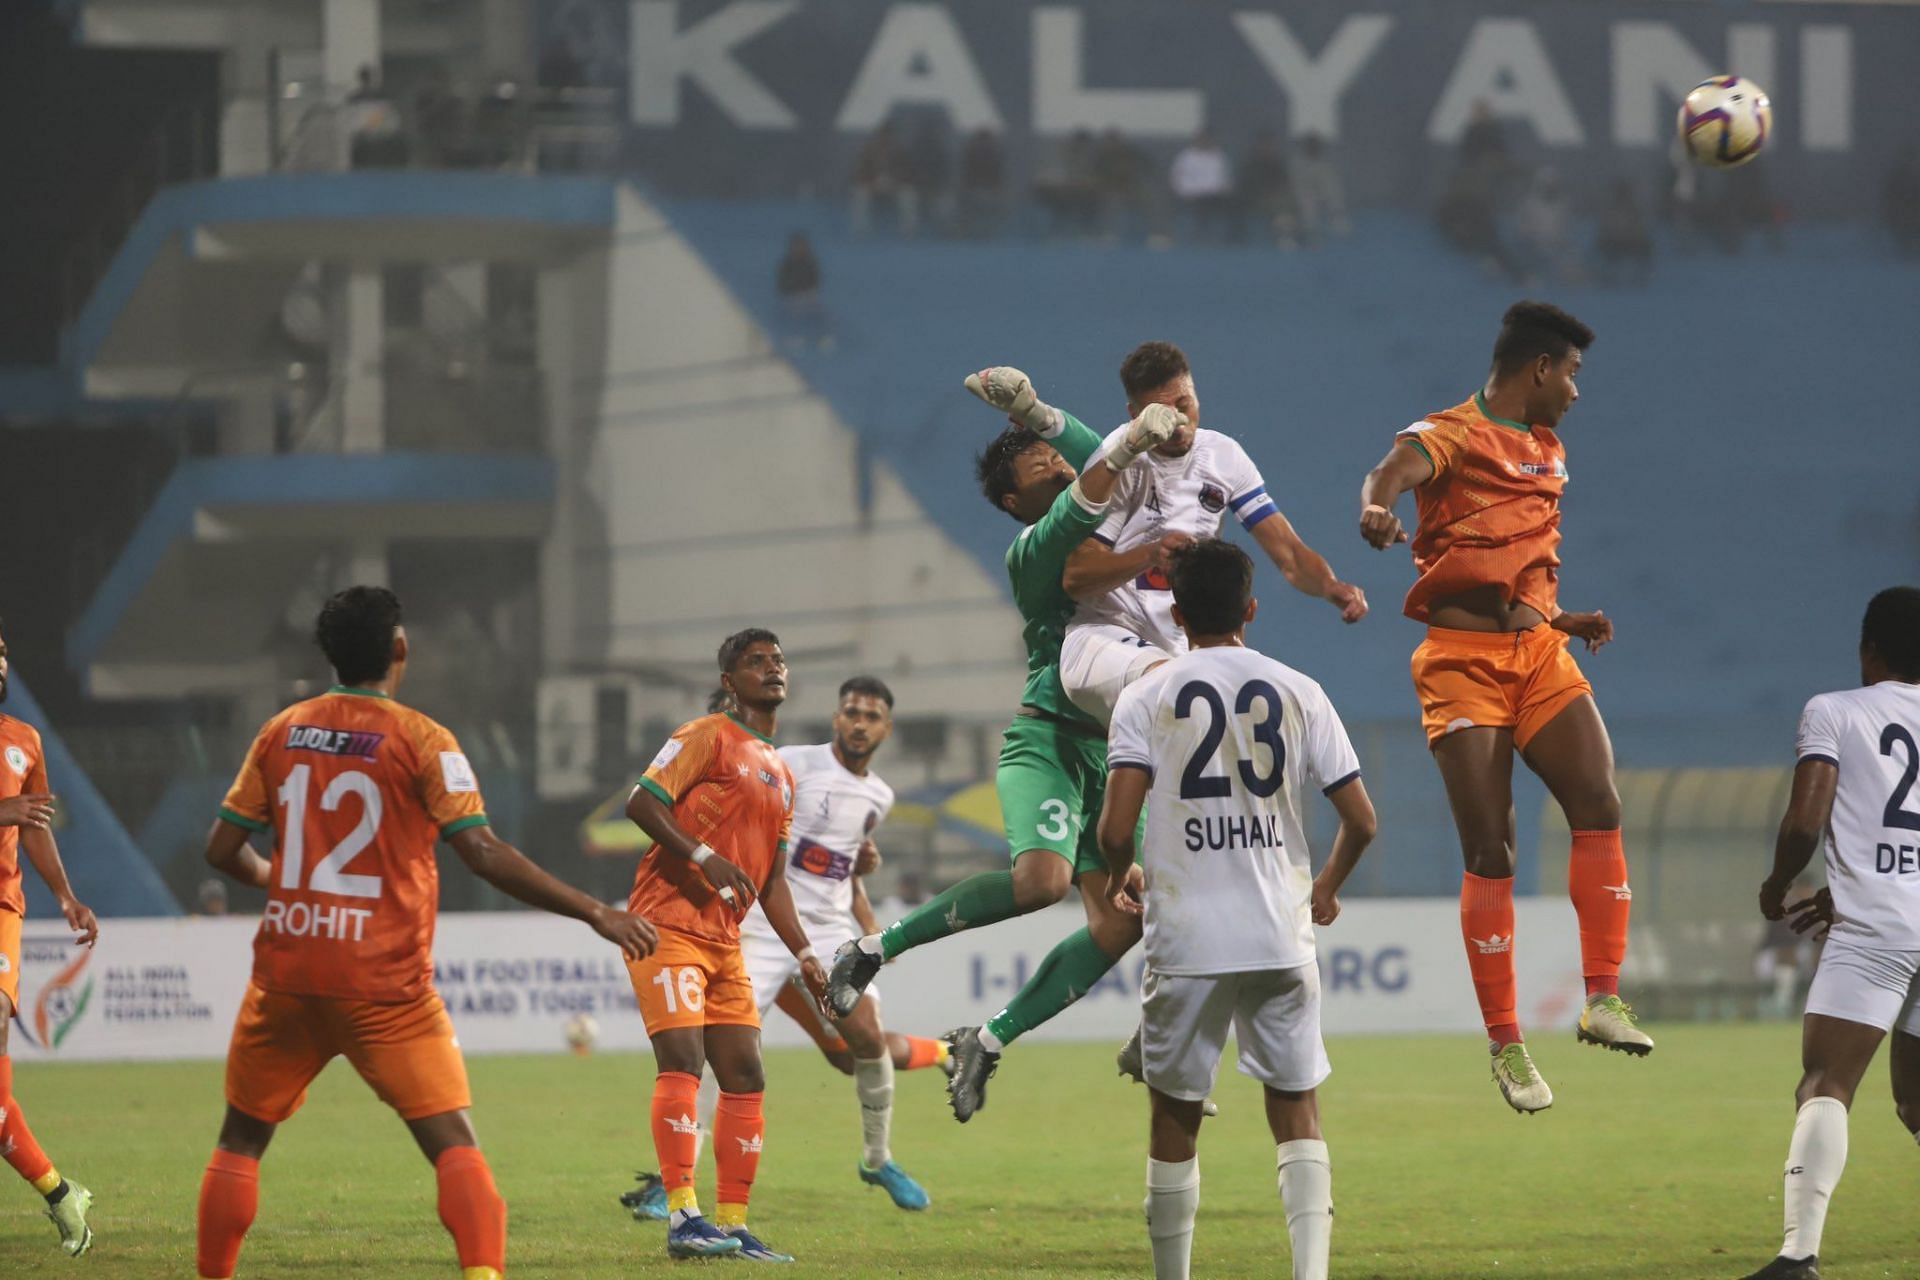 Rajasthan FC in action against NEROCA (Image Courtesy: I-League Twitter)